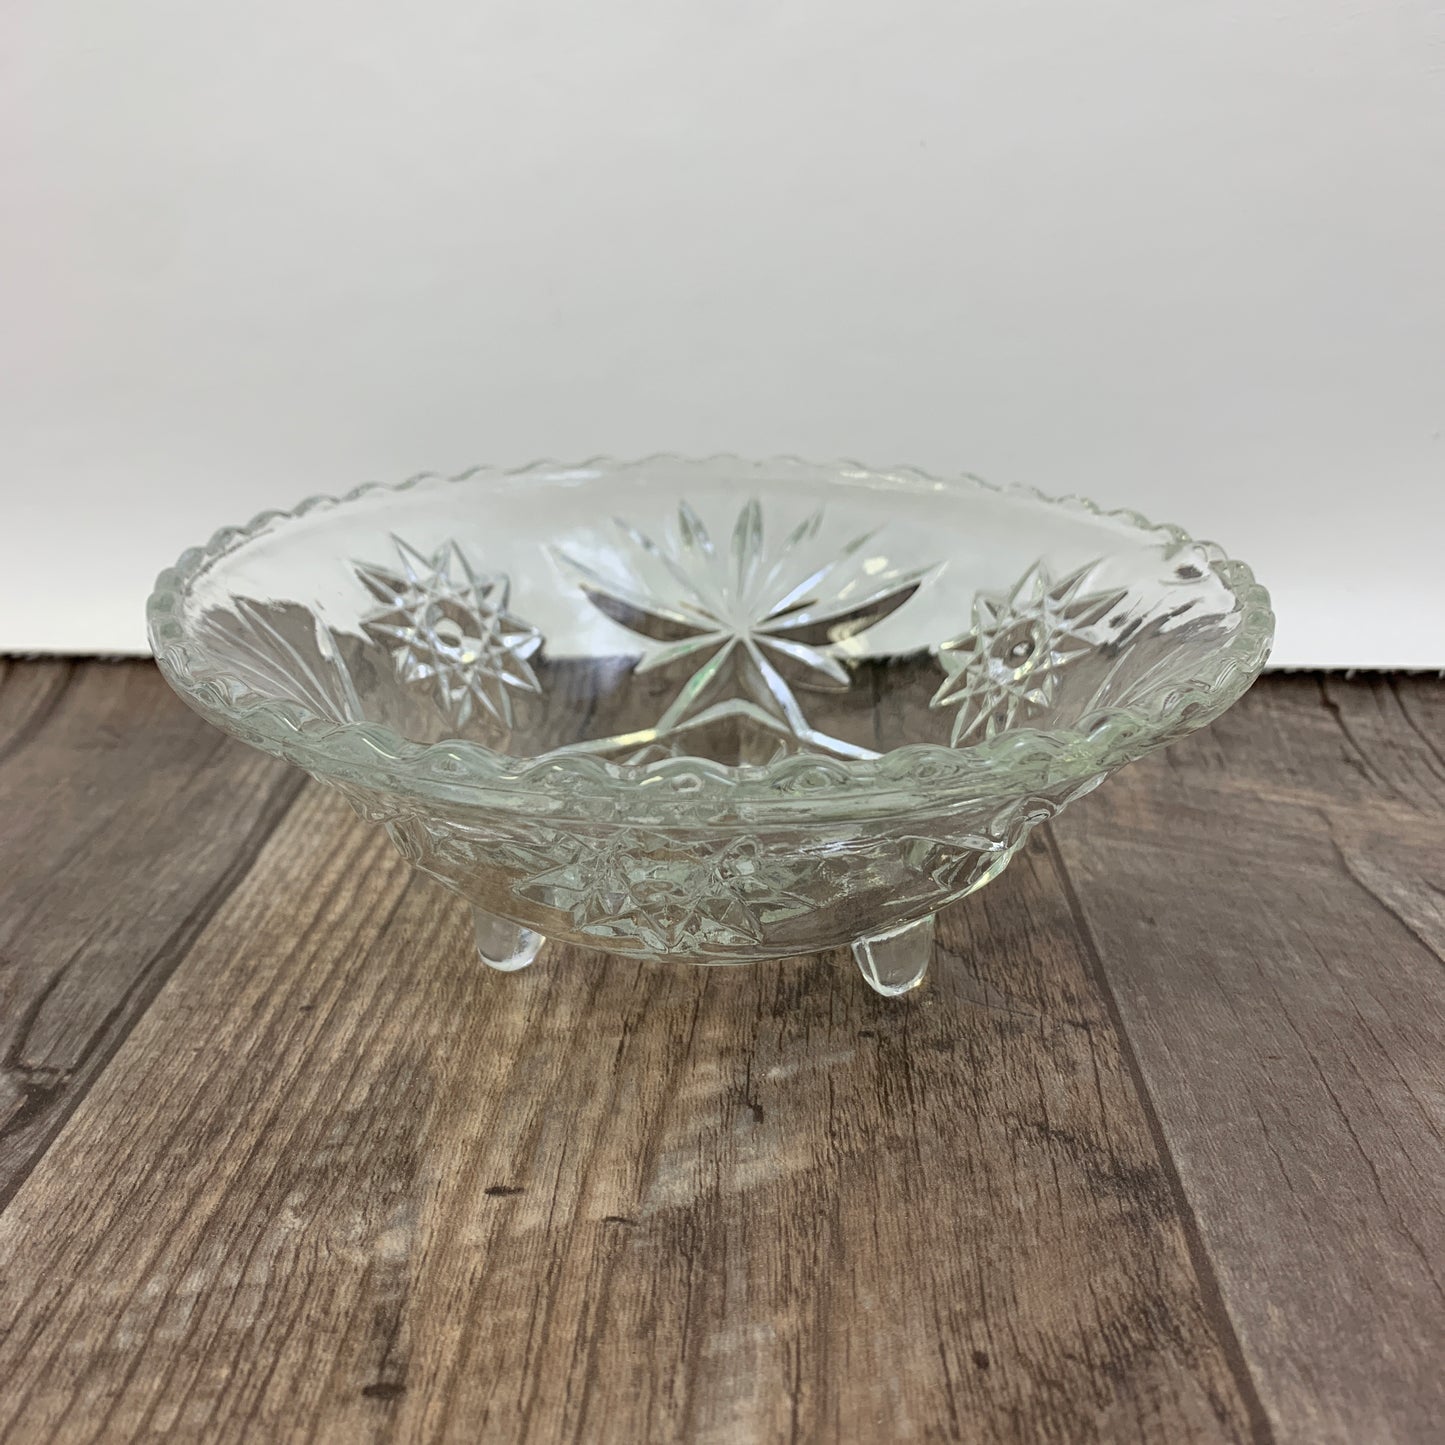 Small Footed Bowl Early American Press Cut Anchor Hocking Vintage Glassware